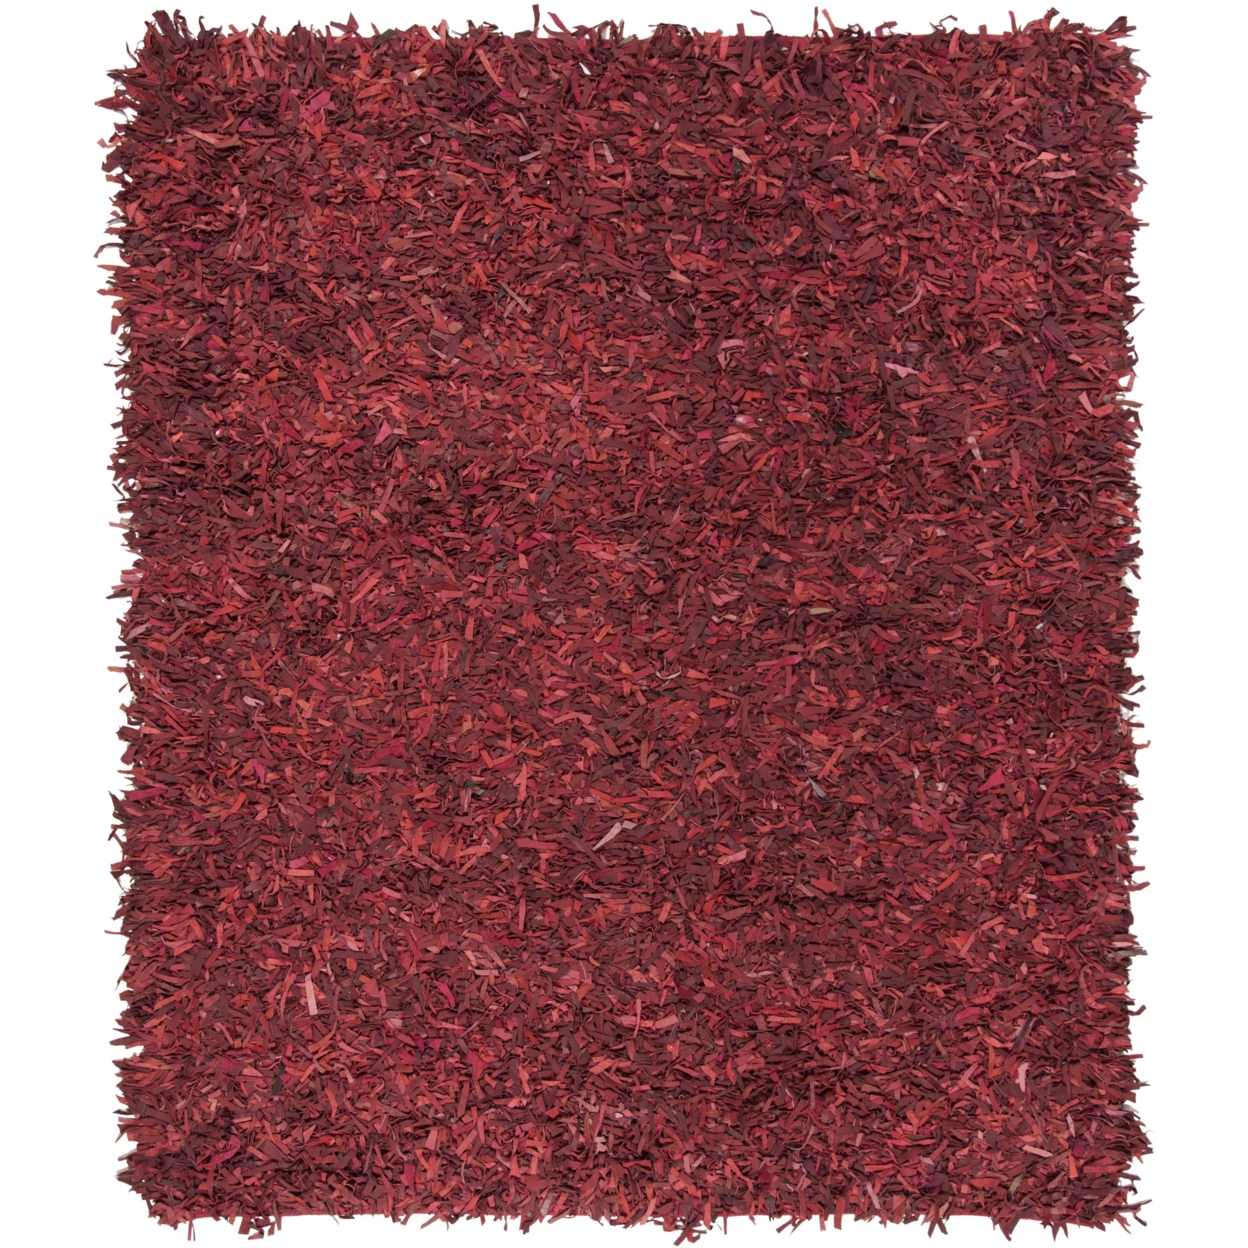 SAFAVIEH Leather Shag LSG601D Hand-knotted Red Rug - 6' X 9'